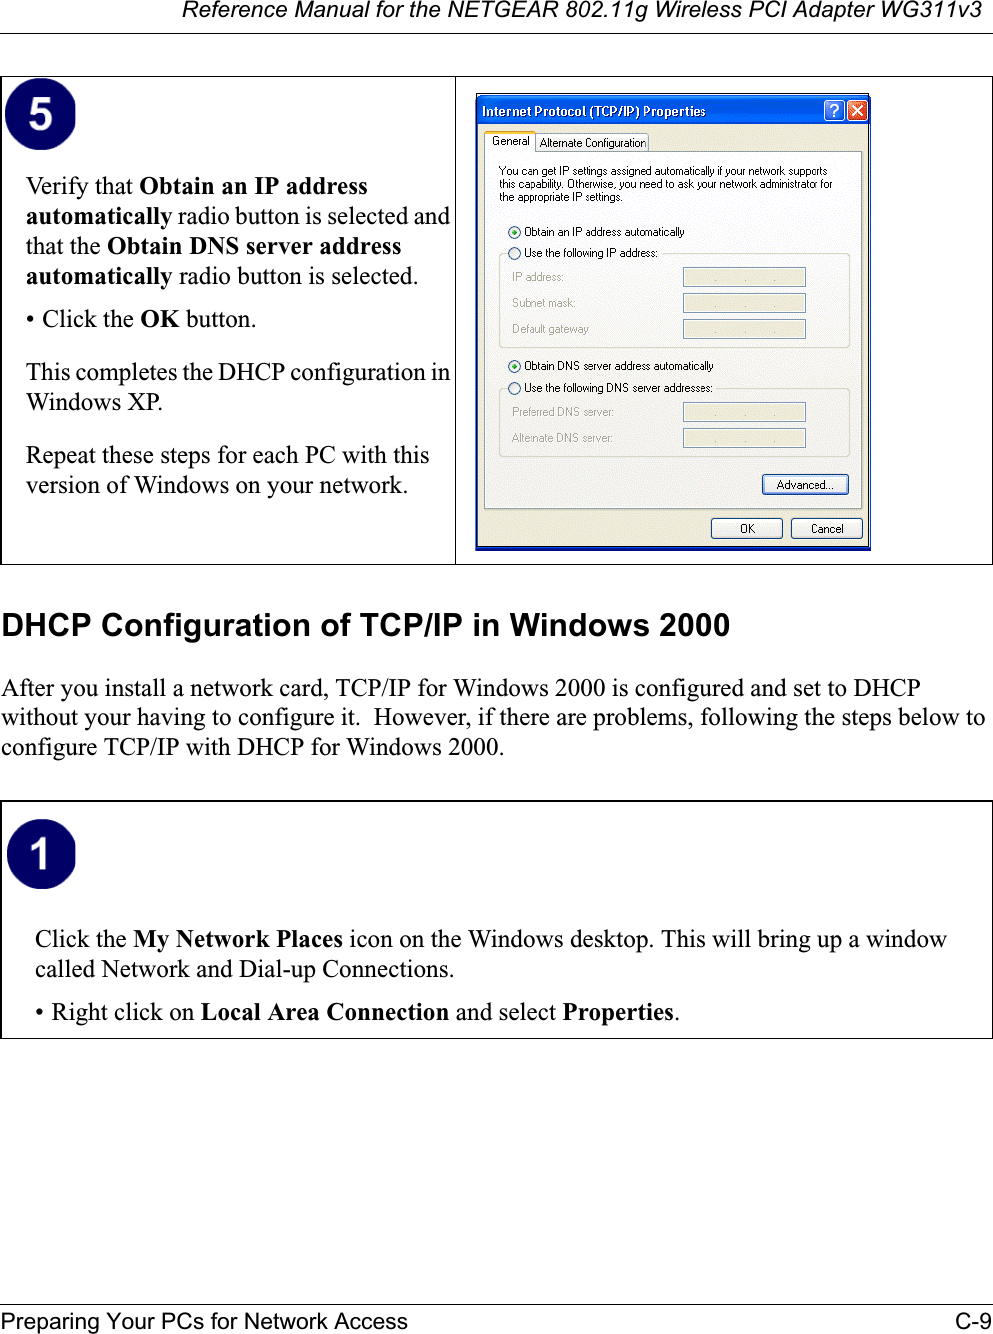 Reference Manual for the NETGEAR 802.11g Wireless PCI Adapter WG311v3Preparing Your PCs for Network Access C-9DHCP Configuration of TCP/IP in Windows 2000 After you install a network card, TCP/IP for Windows 2000 is configured and set to DHCP without your having to configure it.  However, if there are problems, following the steps below to configure TCP/IP with DHCP for Windows 2000.Verify that Obtain an IP address automatically radio button is selected and that the Obtain DNS server address automatically radio button is selected.• Click the OK button.This completes the DHCP configuration in Windows XP.Repeat these steps for each PC with this version of Windows on your network.Click the My Network Places icon on the Windows desktop. This will bring up a window called Network and Dial-up Connections.• Right click on Local Area Connection and select Properties.